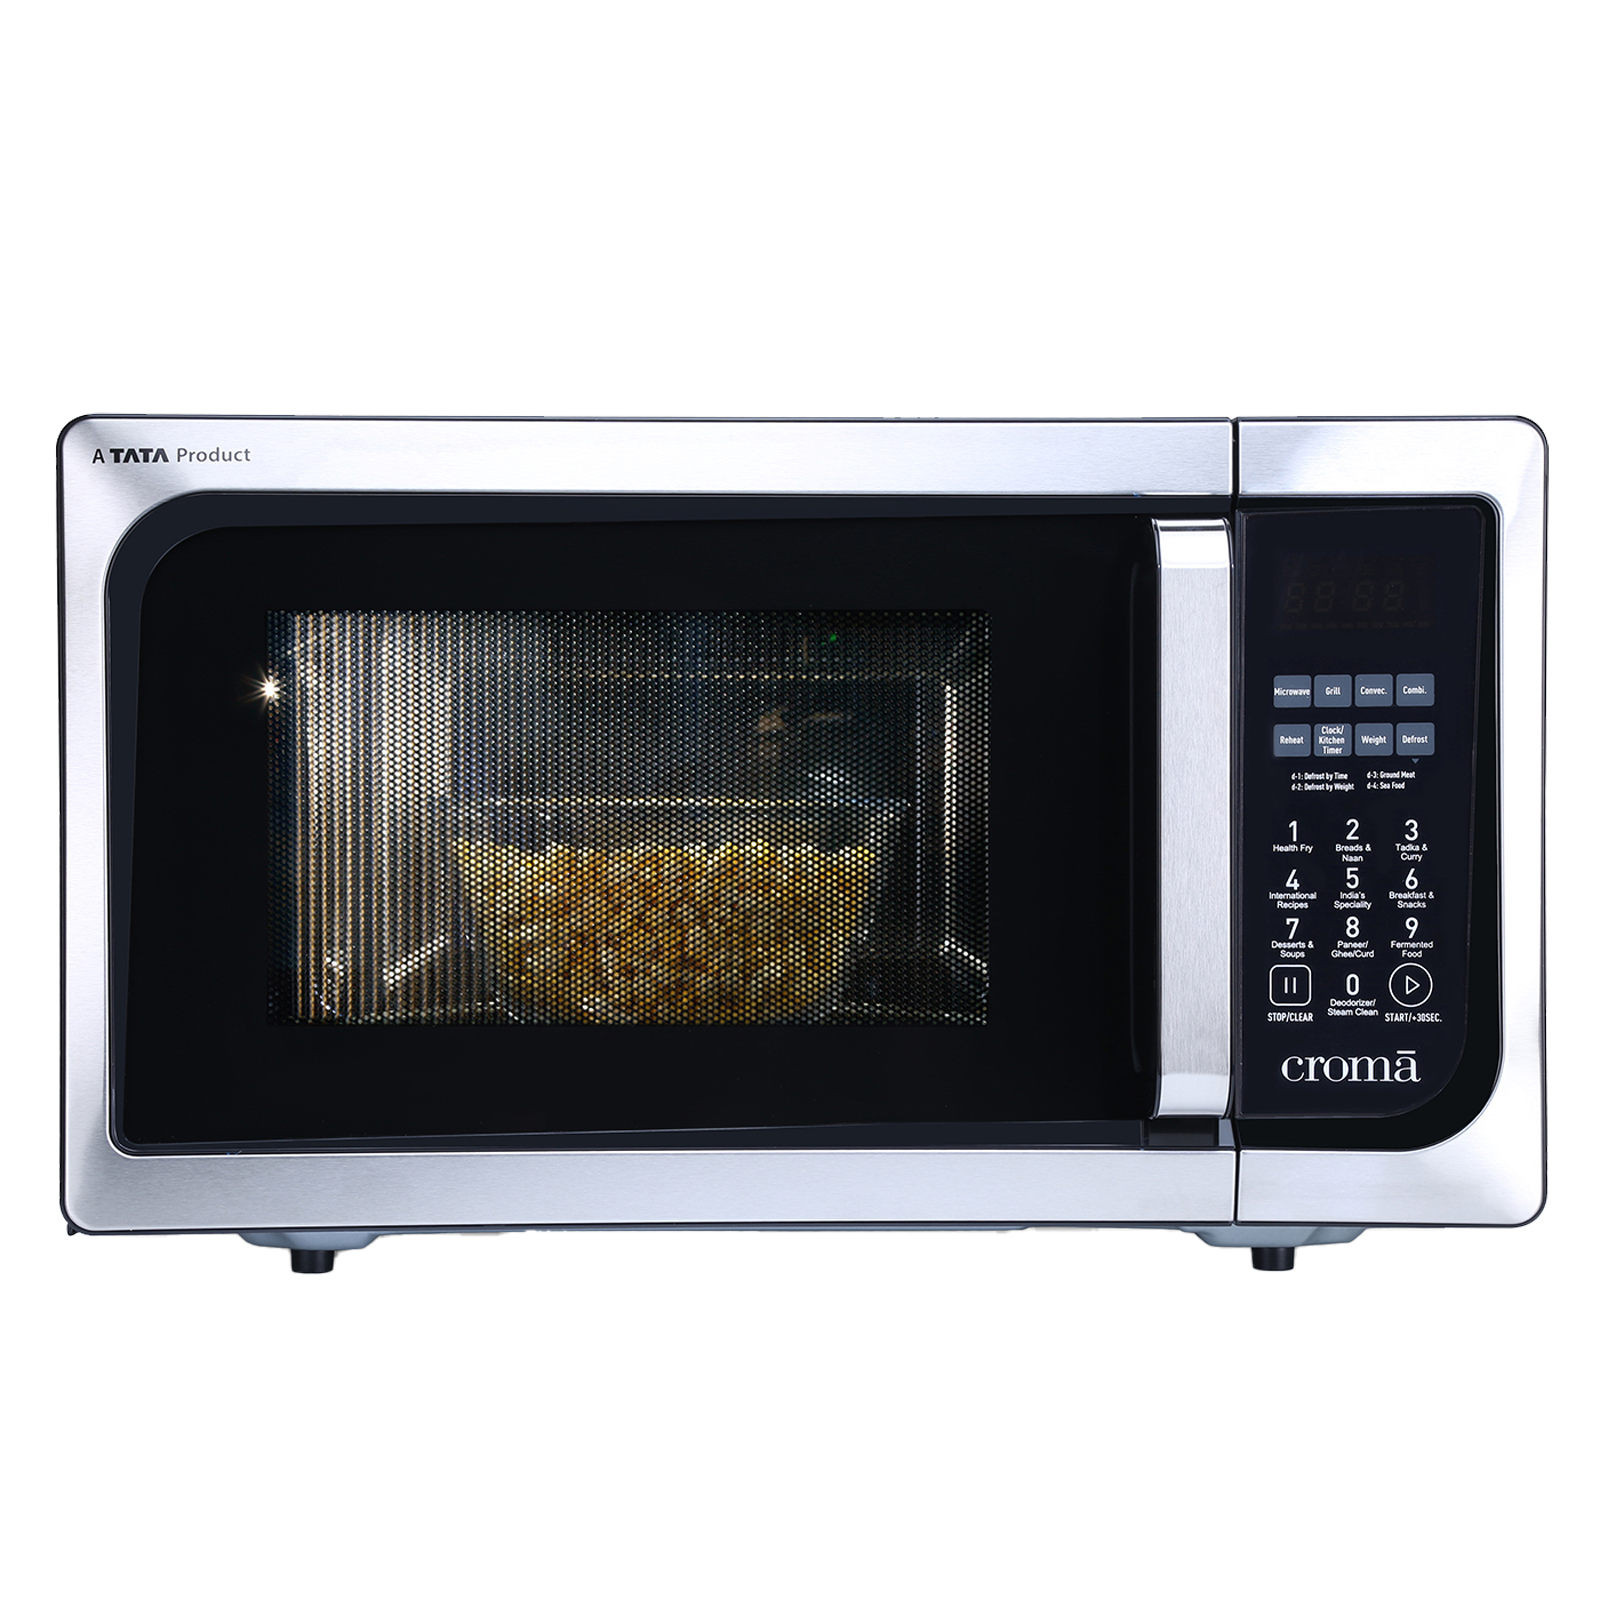 Croma 23 Litres Convection Microwave Oven (Child Lock, CRAM0151, Black)